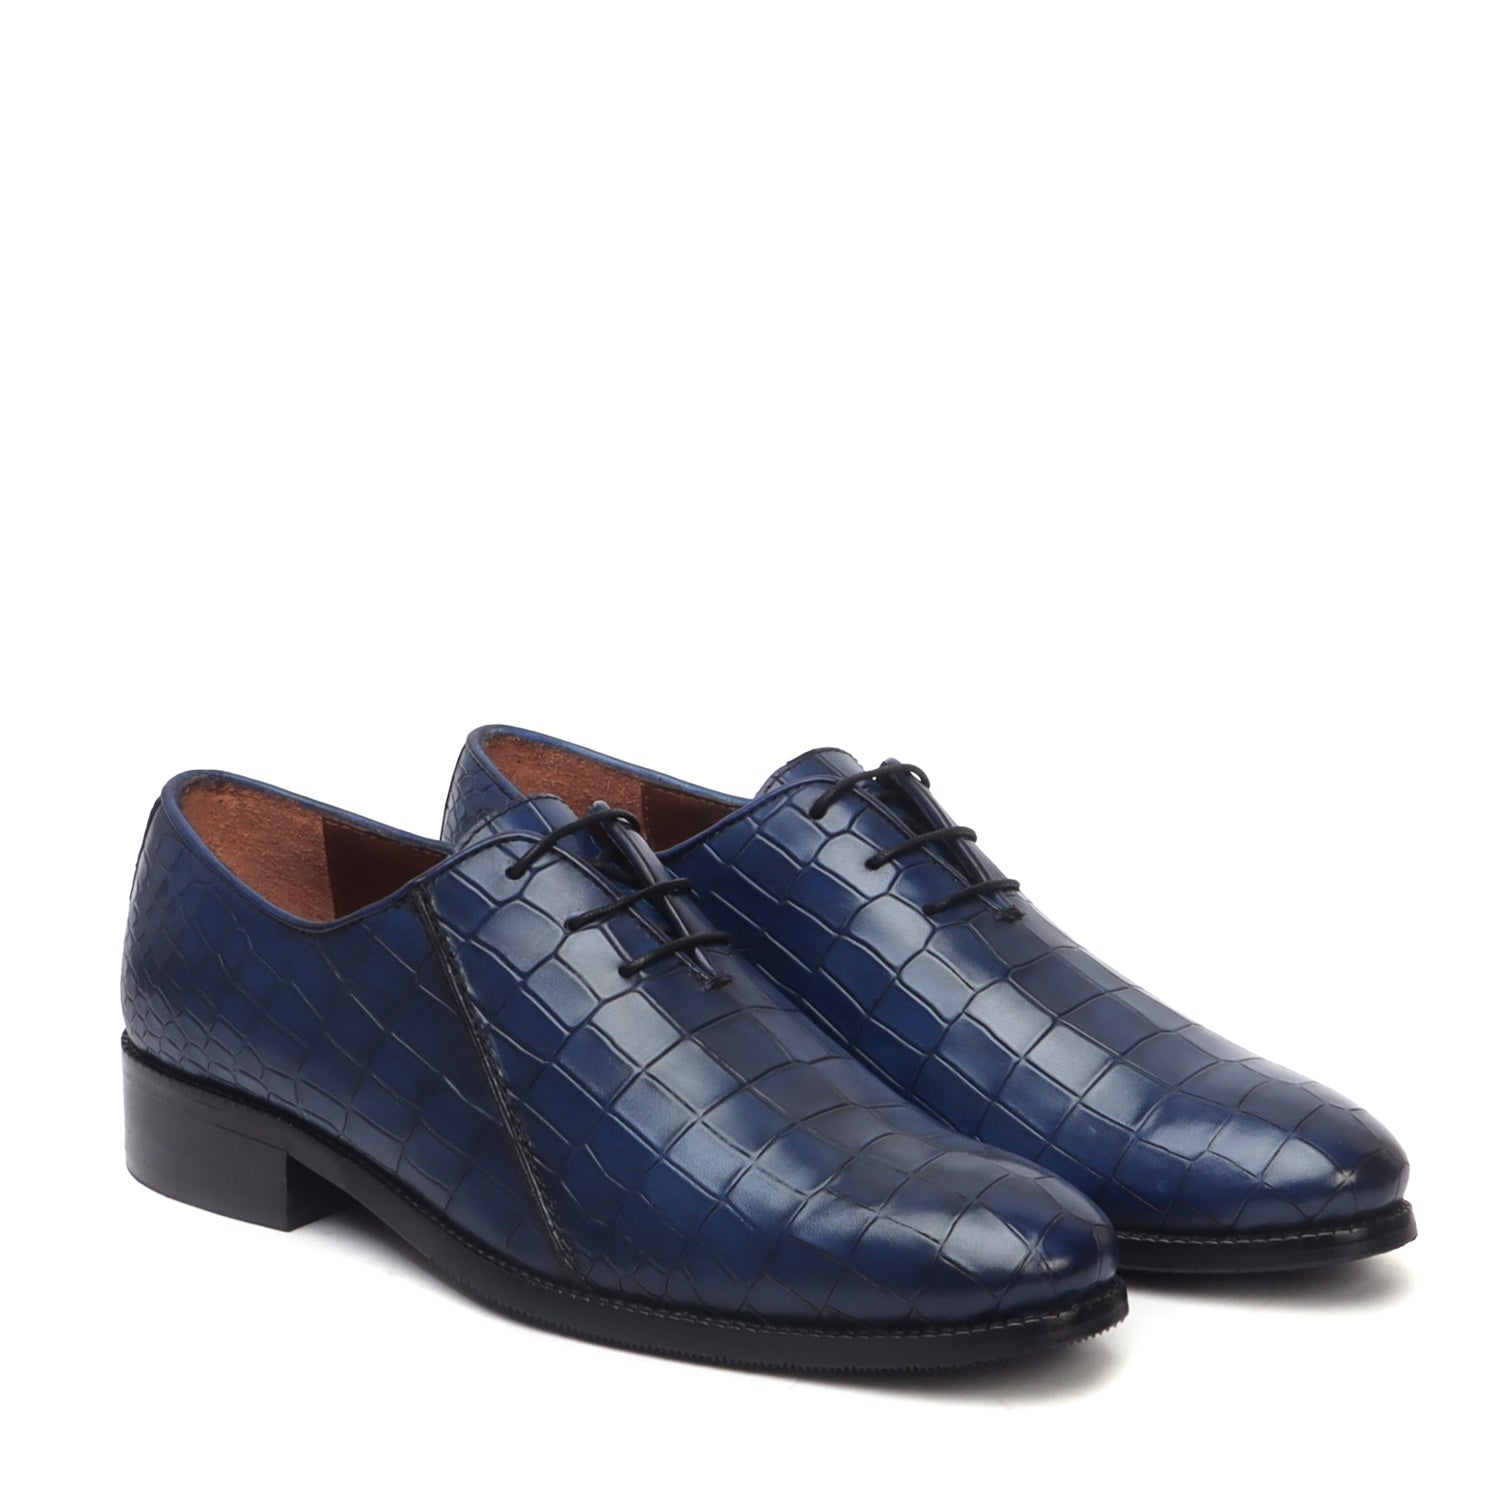 Blue Merged Look Croco Leather Oxfords Lace Up Formal Shoes For Men by Brune & Bareskin